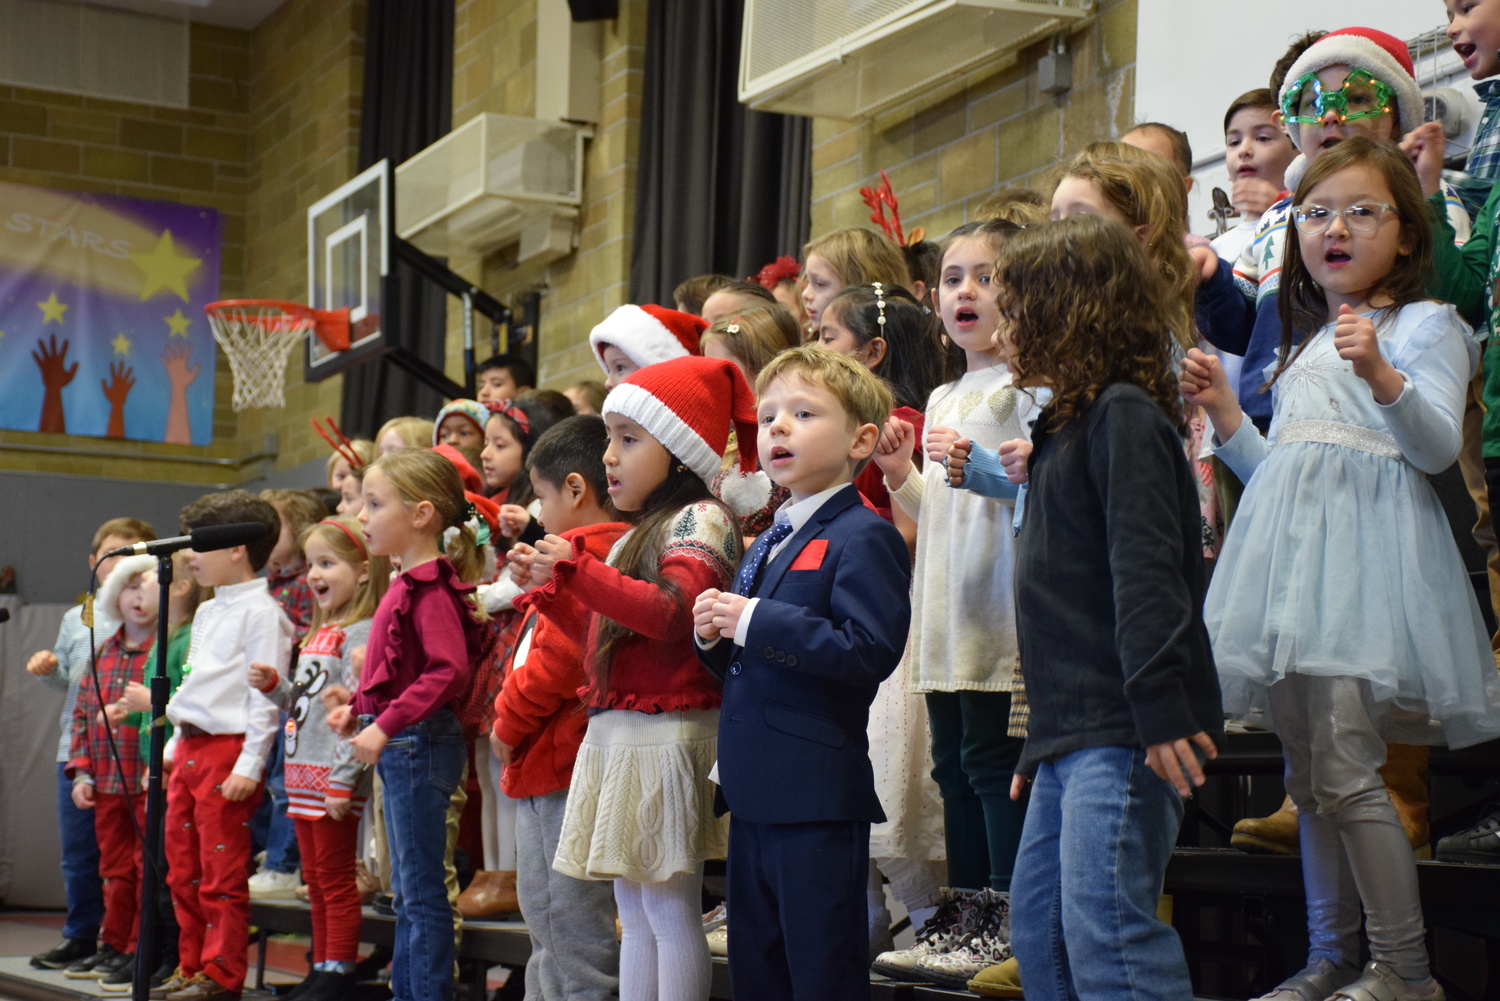 Sag Harbor Elementary School kindergartners performed their annual Holiday Sing at Morning Program. Lead by the elementary school’s music teacher, Deanna Locascio, the class sang several songs to share holiday cheer with their schoolmates and families. “ ‘Feliz Navidad’ was their favorite song to sing,” said Locascio. “Every time they would come into class, they would ask to sing it.” COURTESY SAG HARBOR SCHOOL DISTRICT